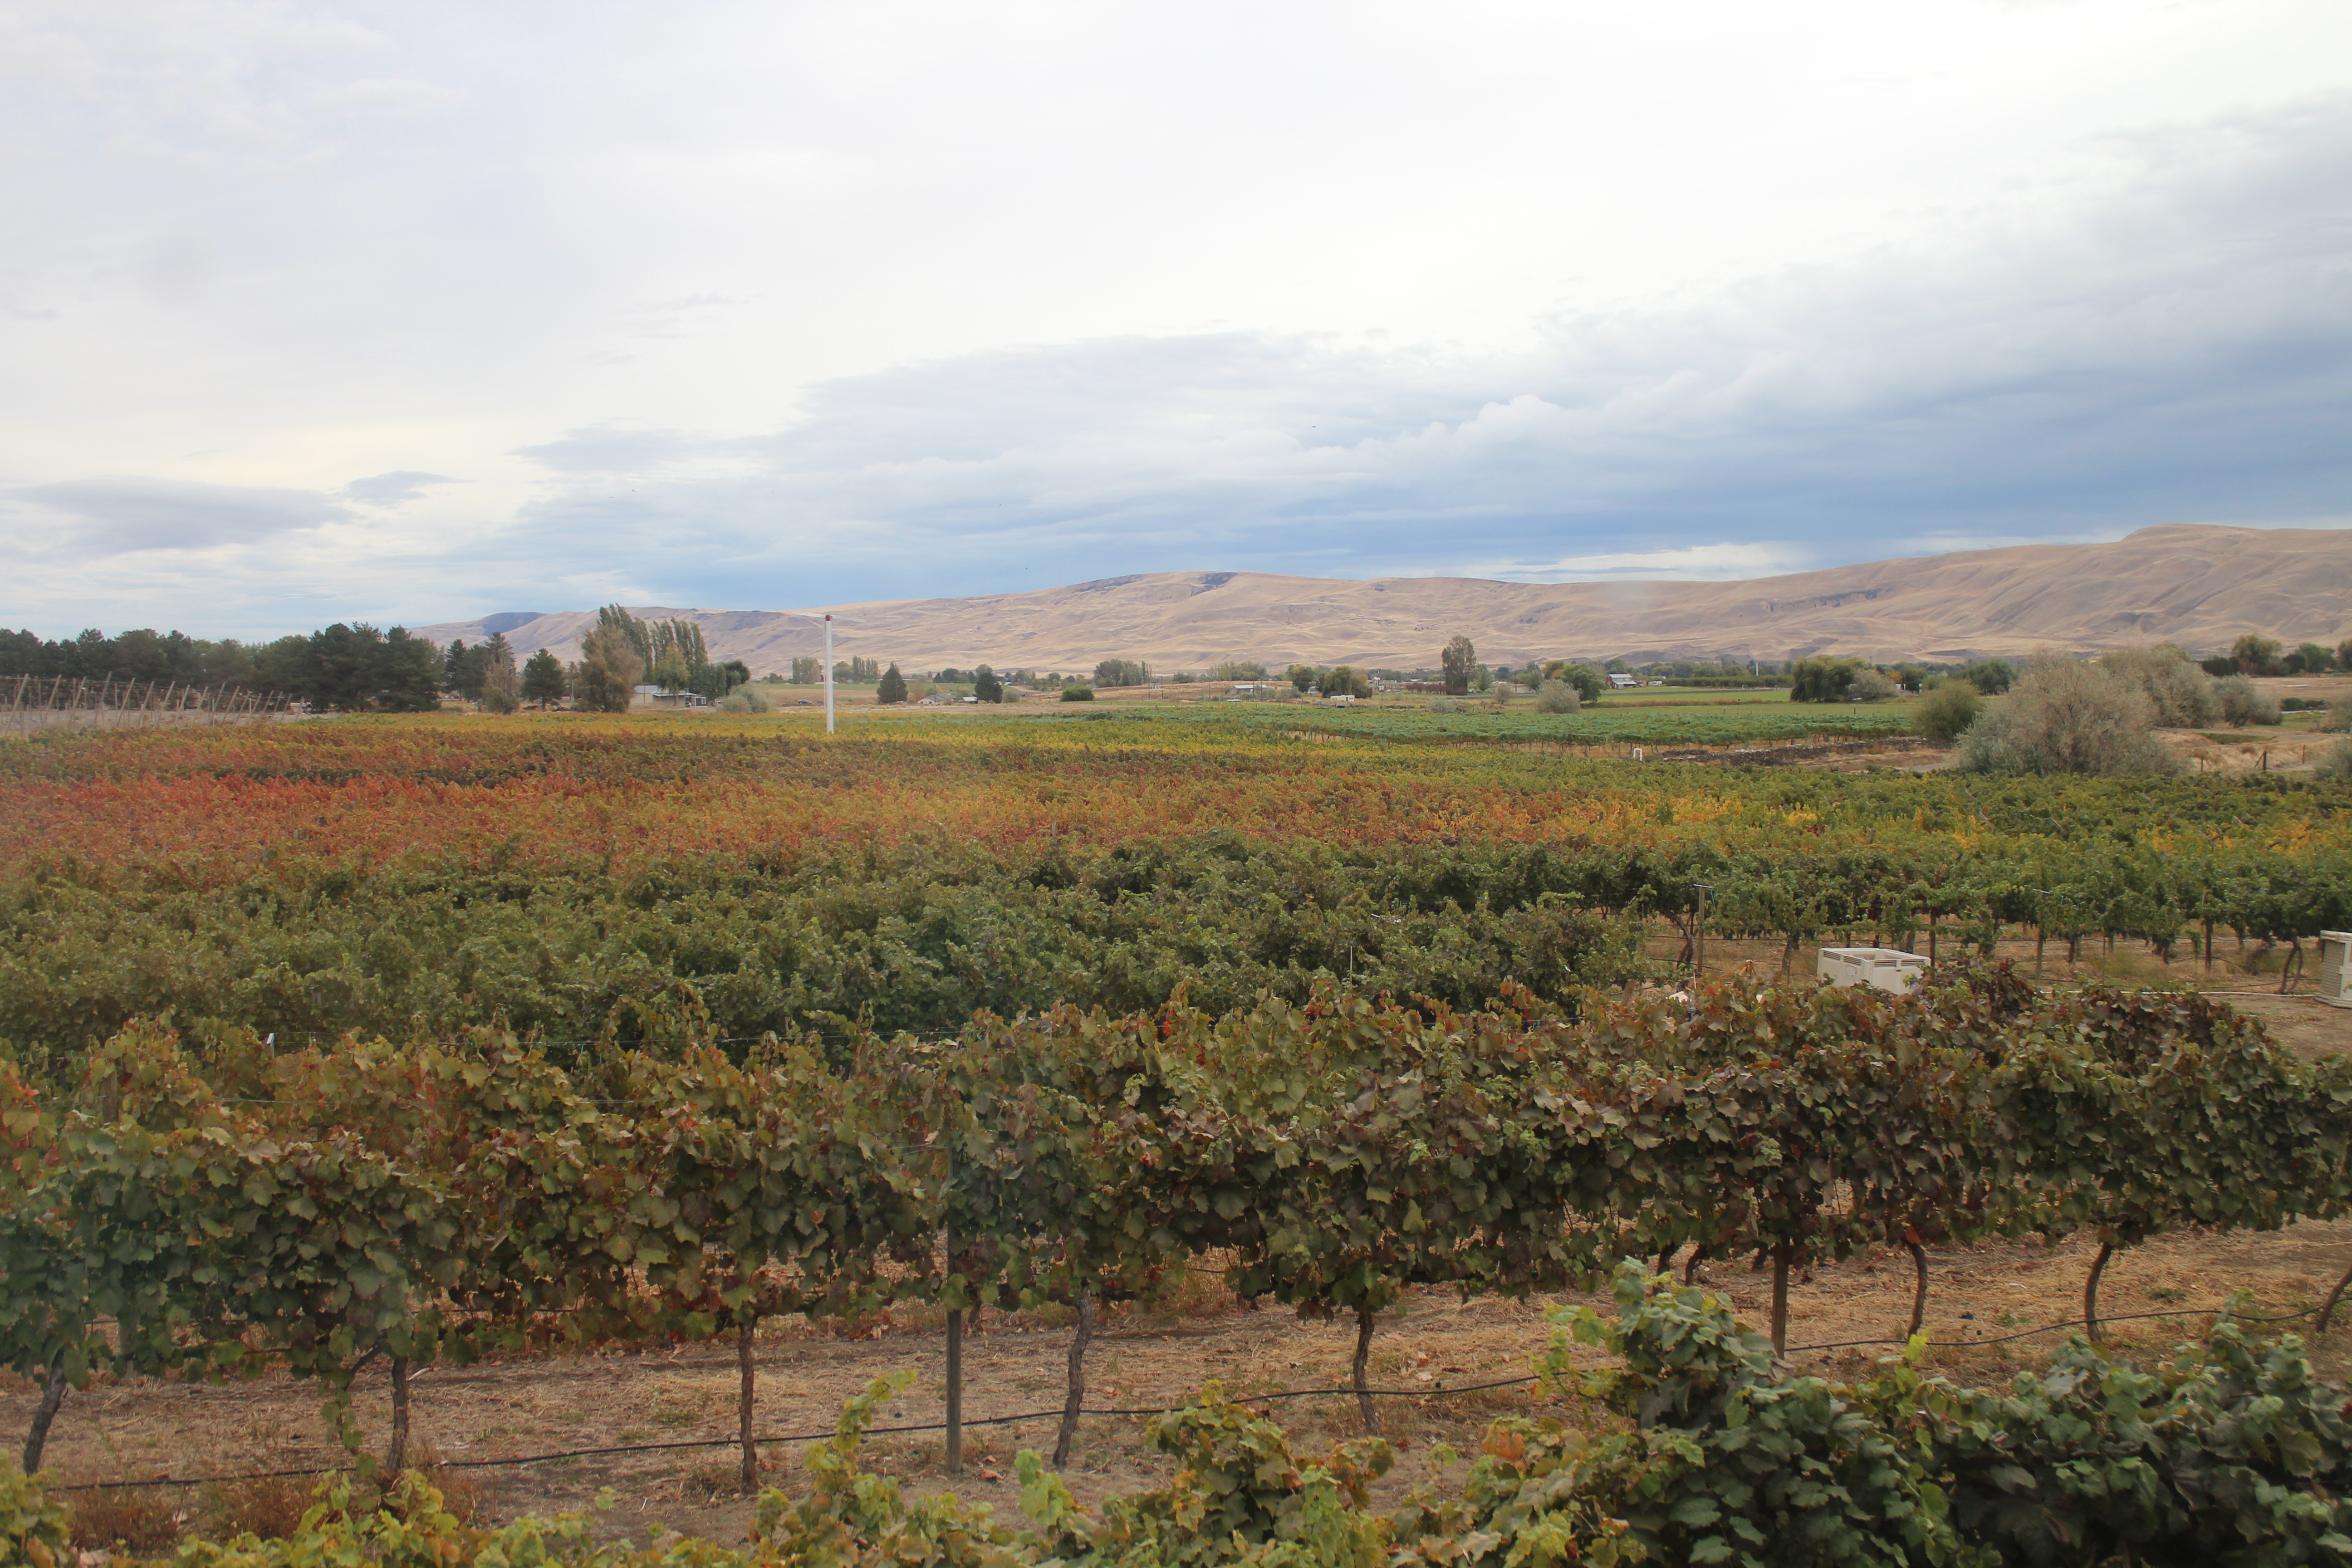 Vineyard at Domanico Cellars in Prosser, photo by Carrie Uffindell